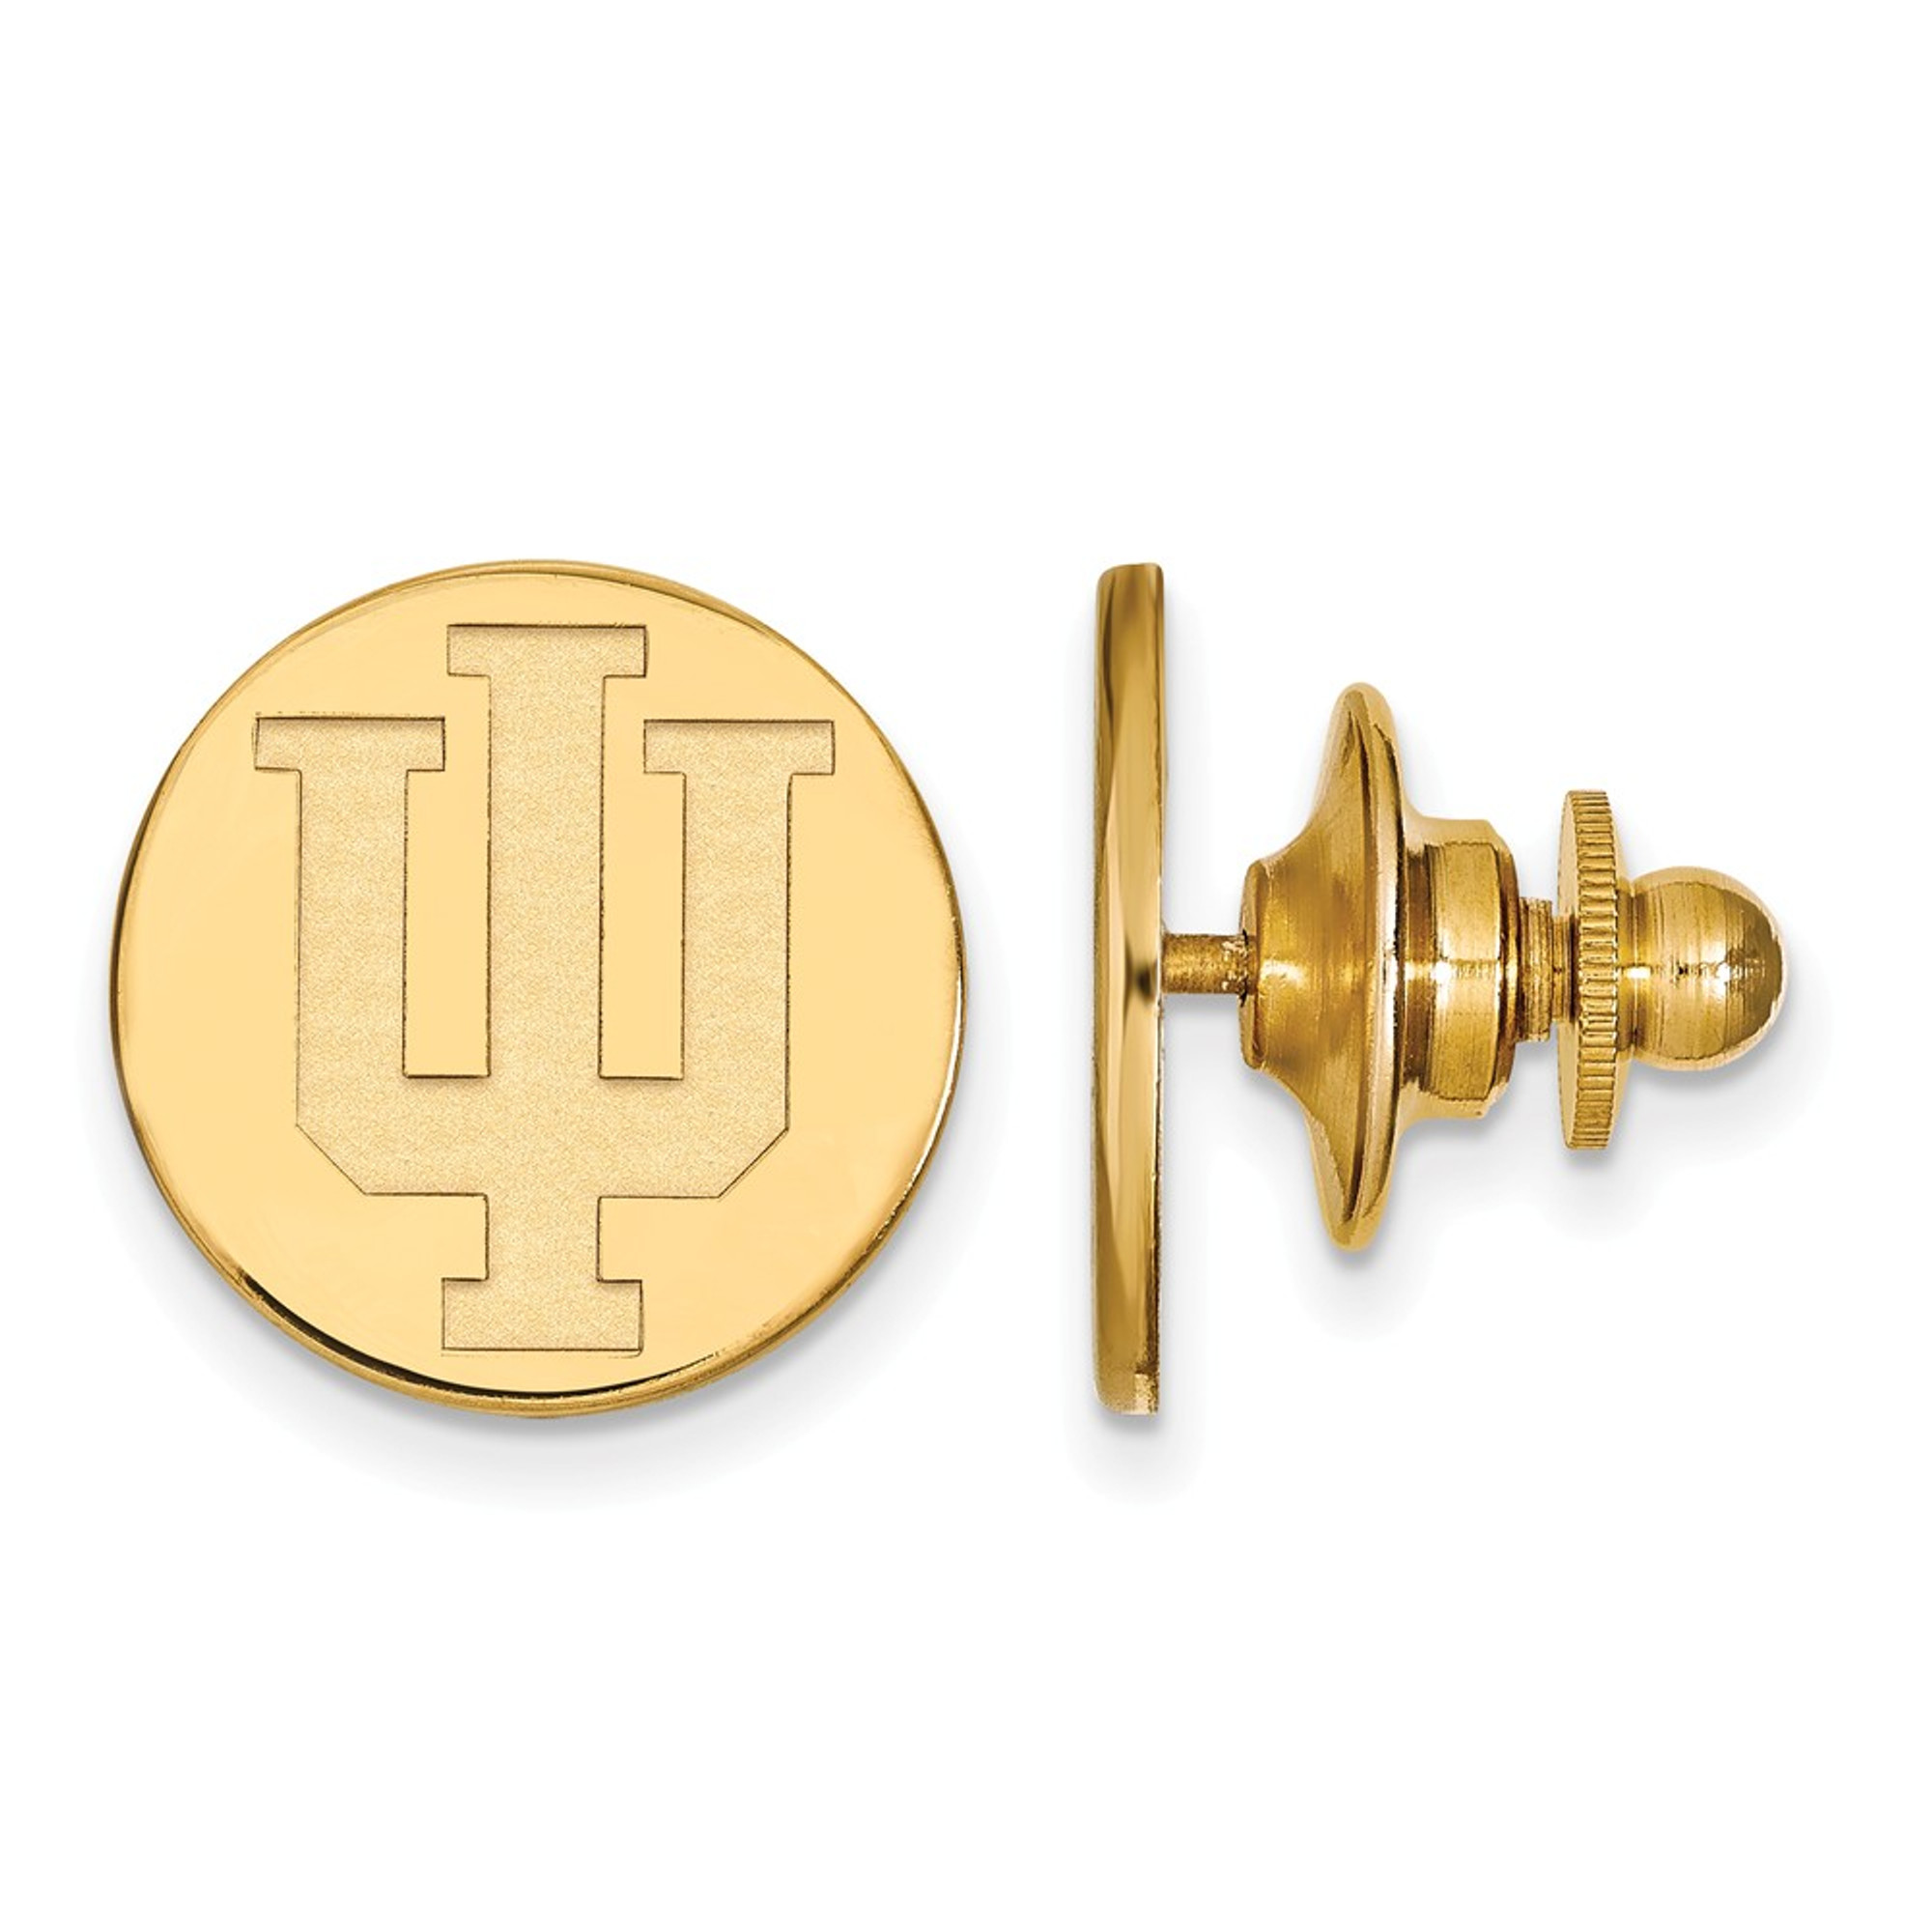 Indiana University Sterling Silver Gold Plated Lapel Pin